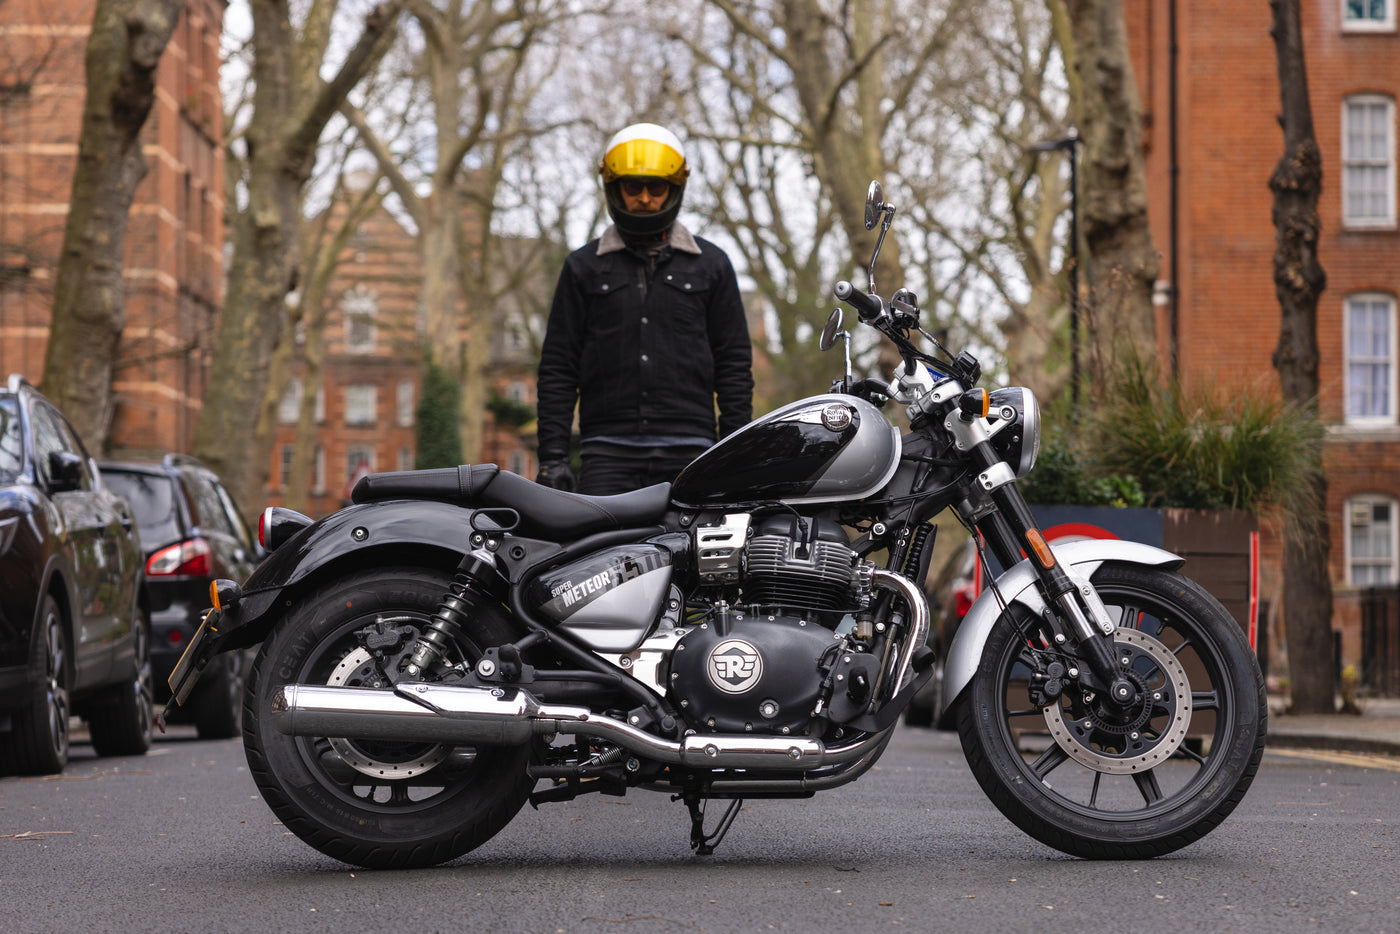 Royal Enfield 650 Super Meteor - First date